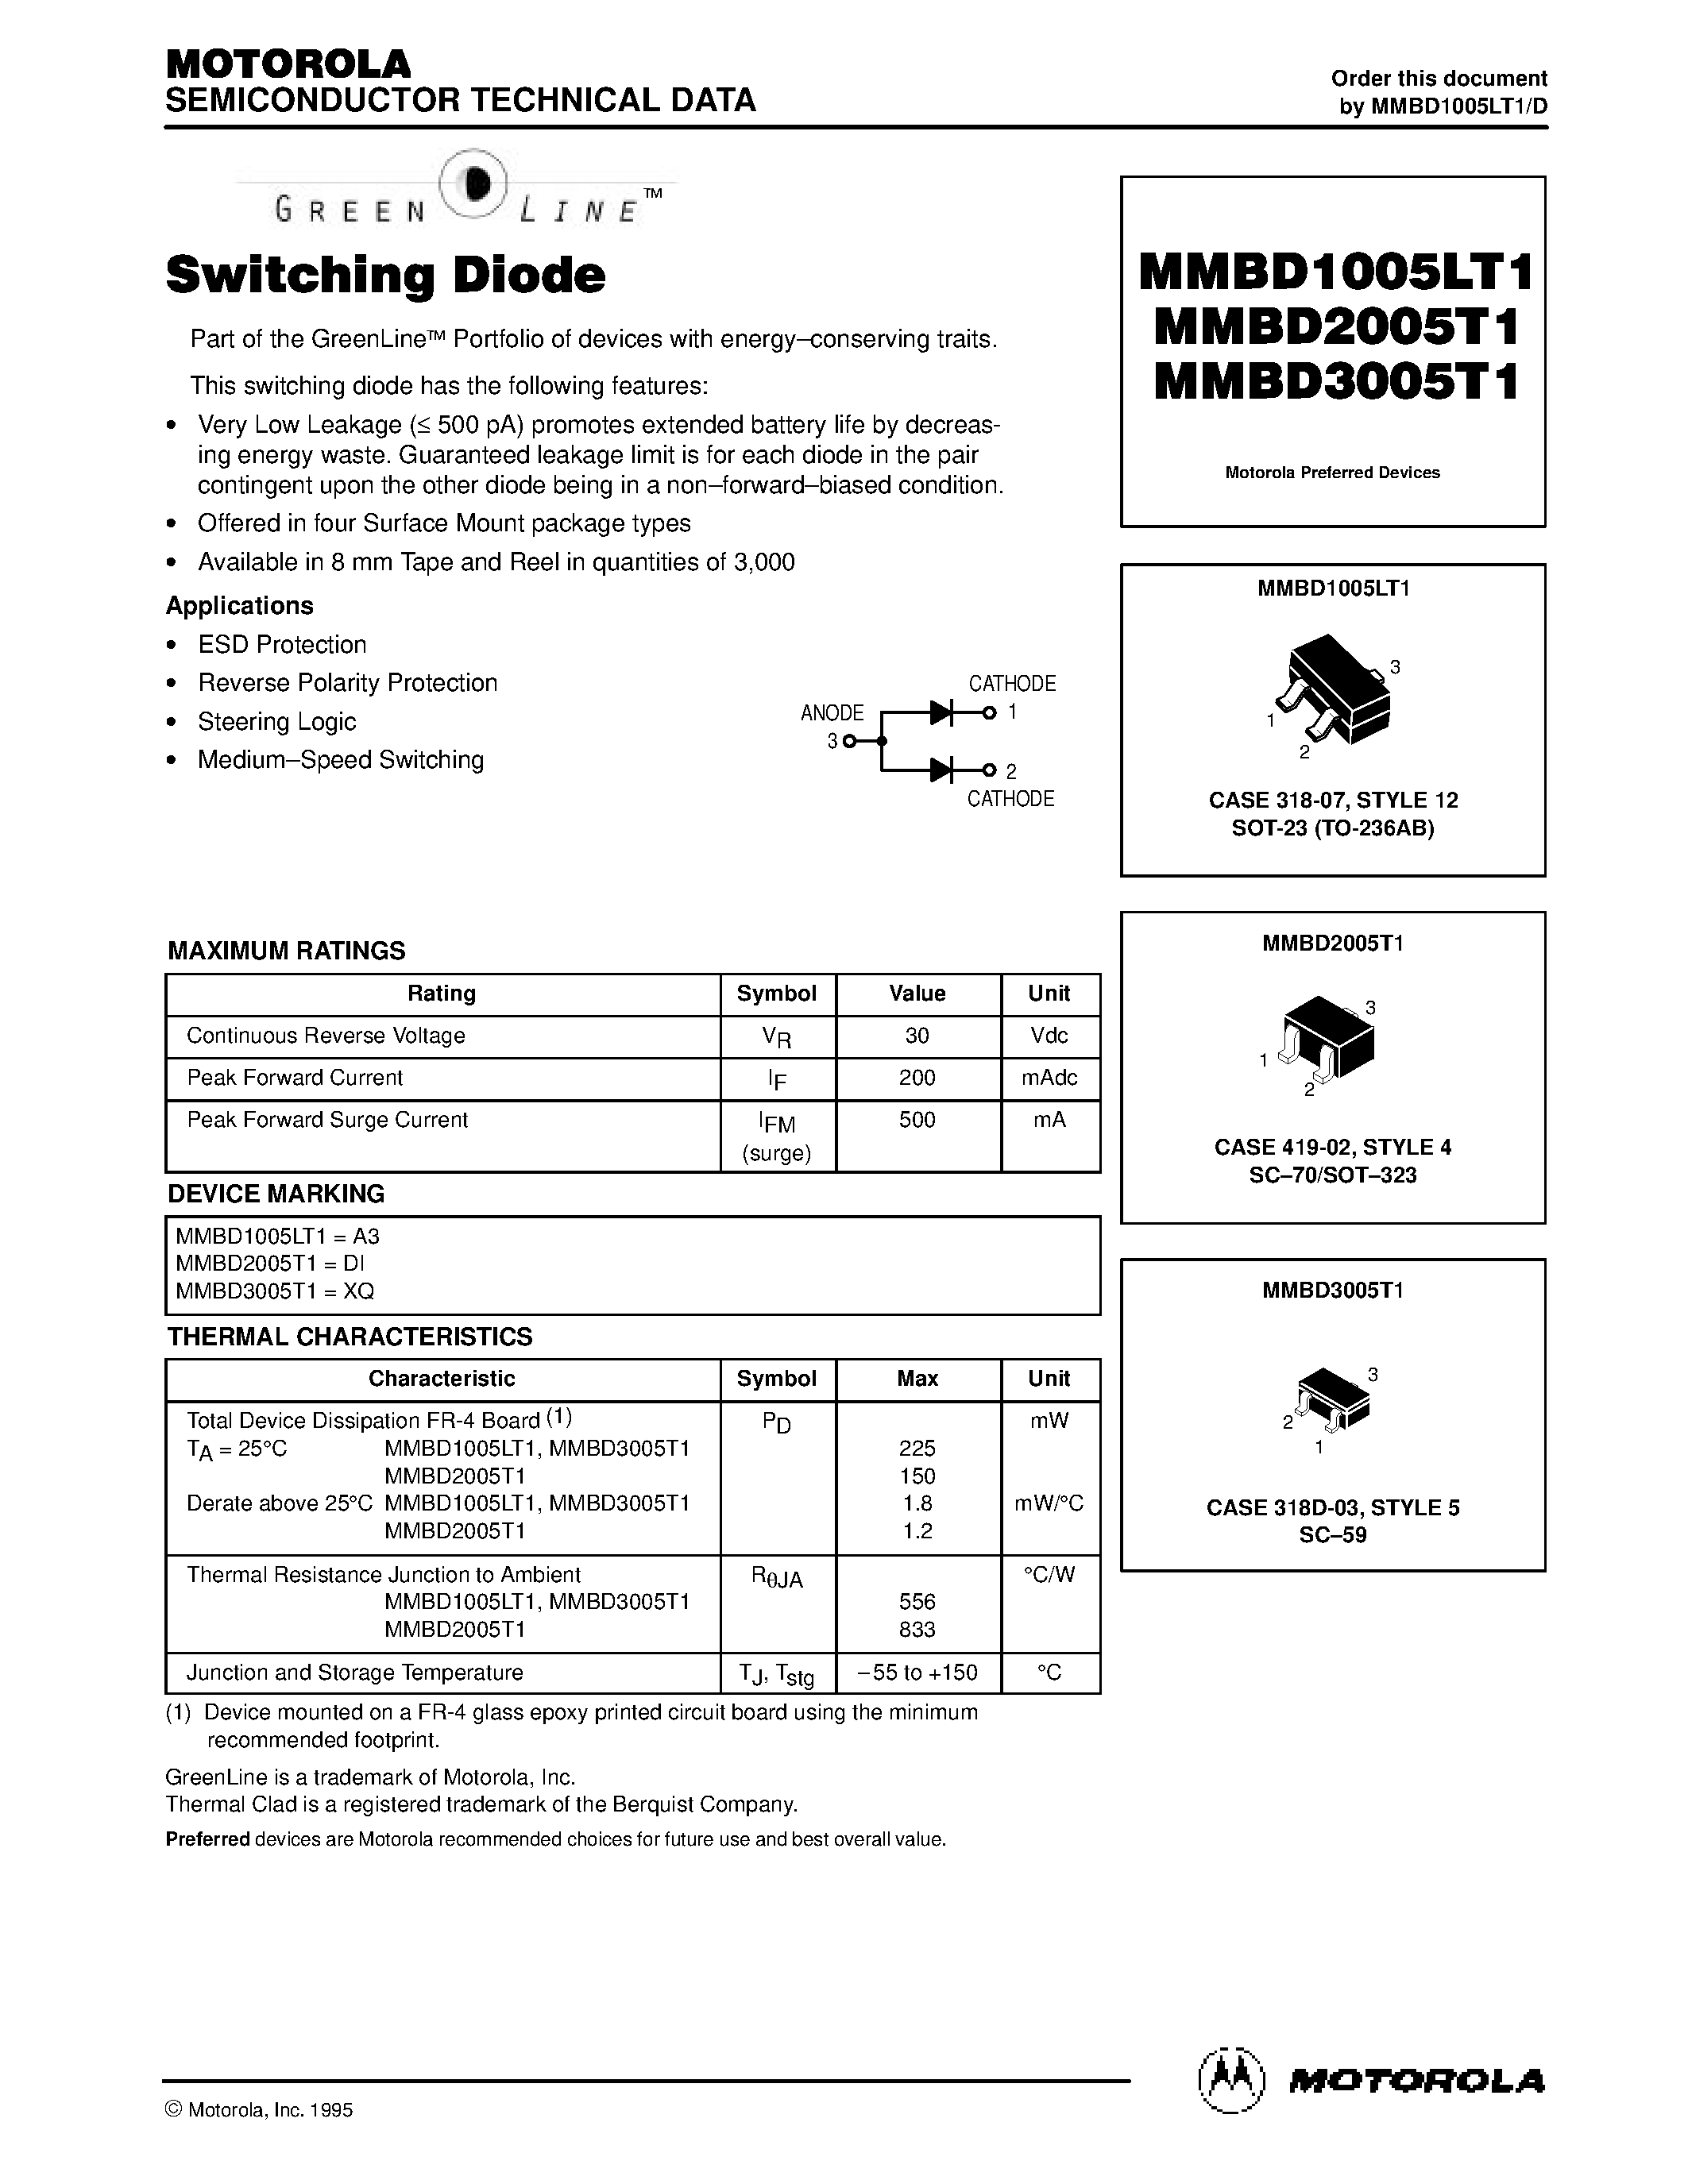 Datasheet MMBD1005LT1 - Switching Diode page 1